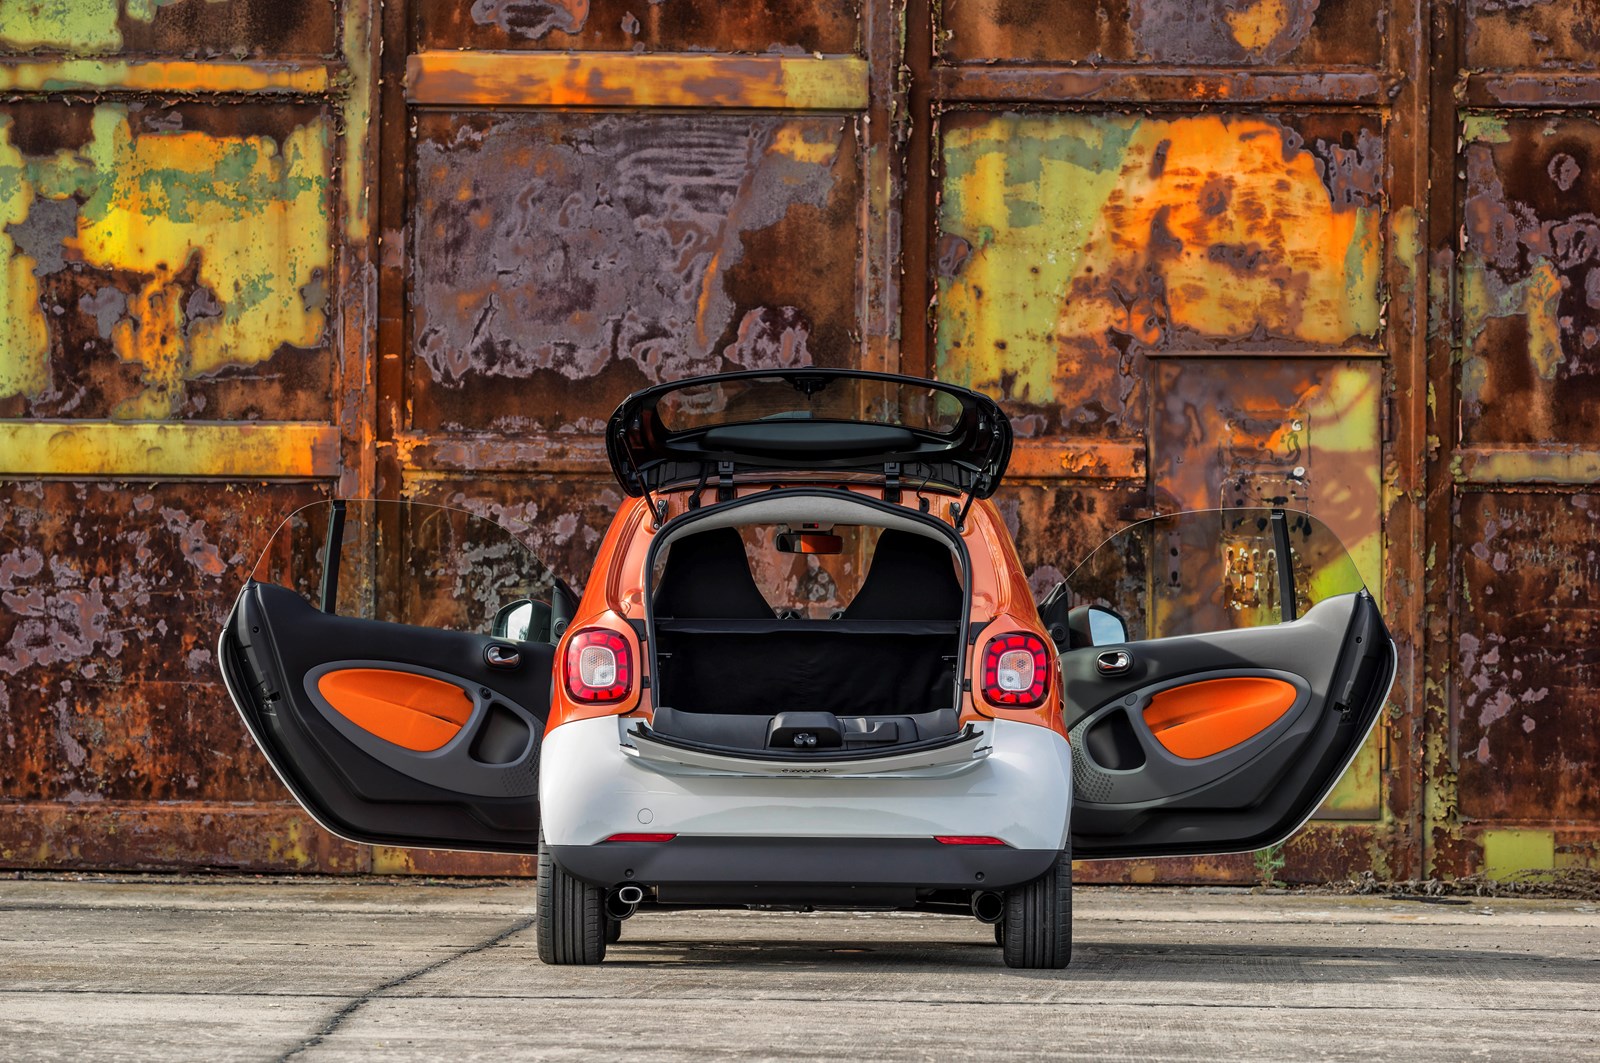 SMART FORTWO - smart fortwo im Test 2014